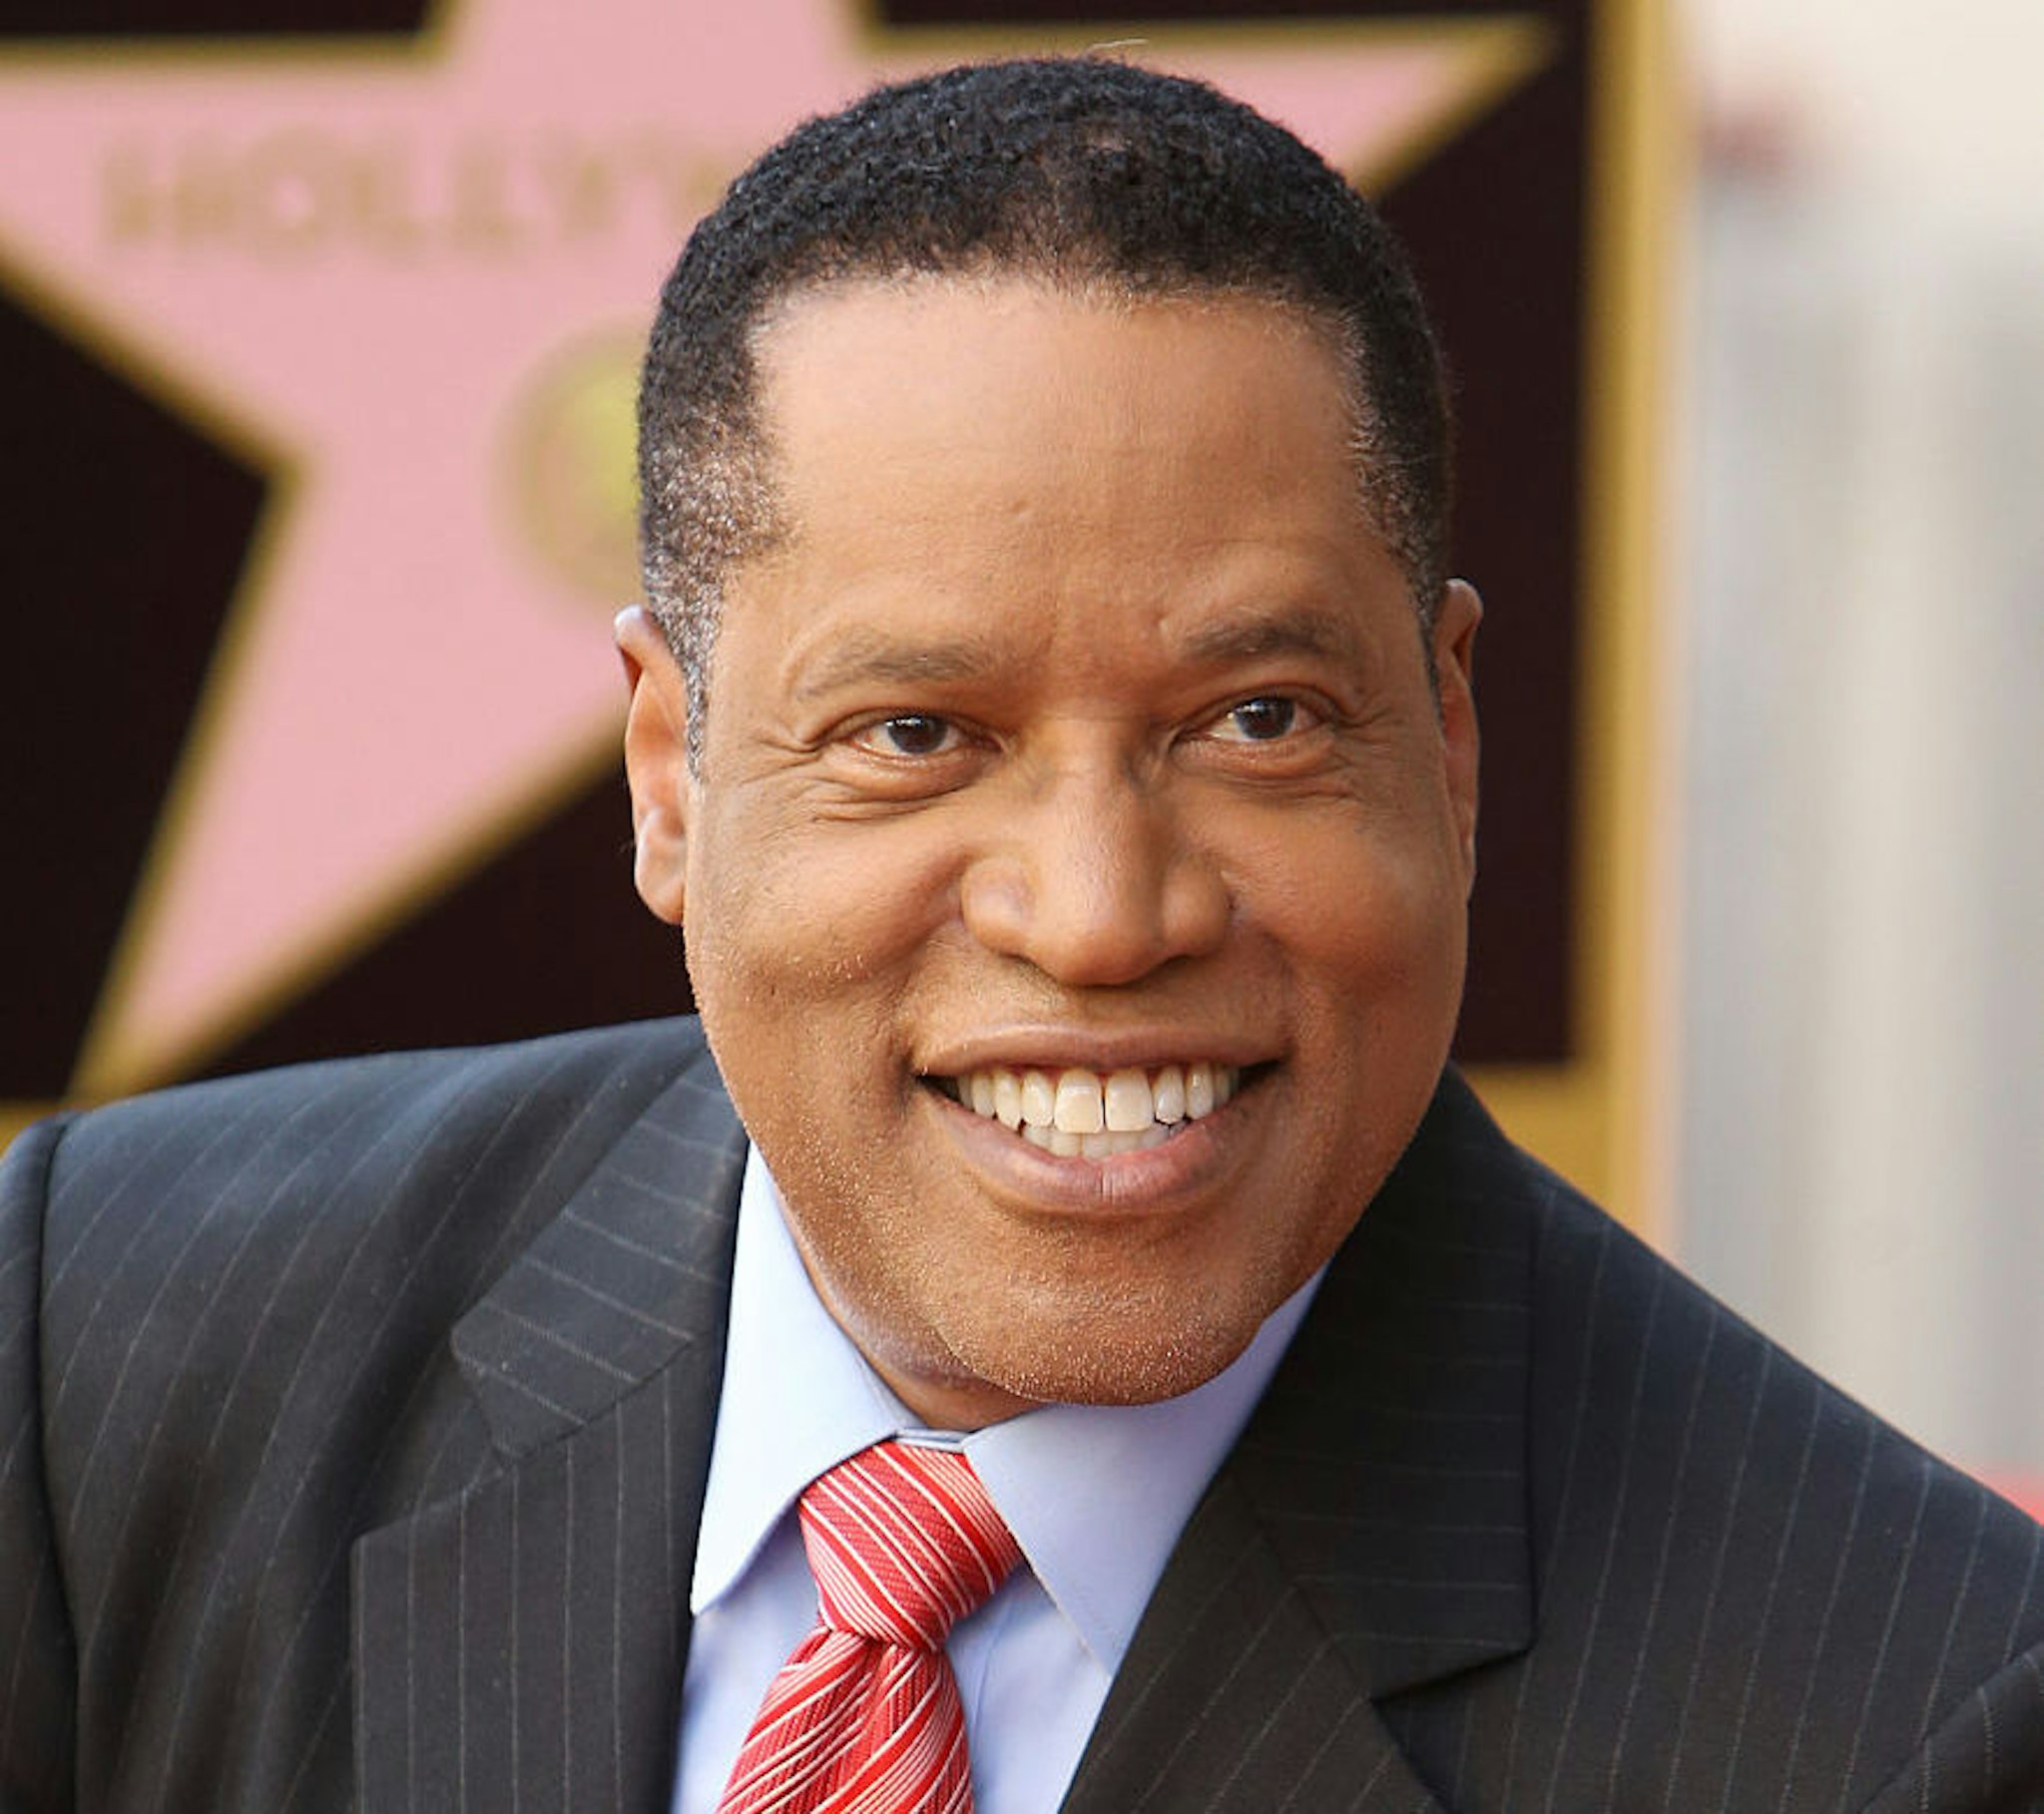 Larry Elder attends the ceremony honoring him with a Star on The Hollywood Walk of Fame on April 27, 2015 in Hollywood, California.